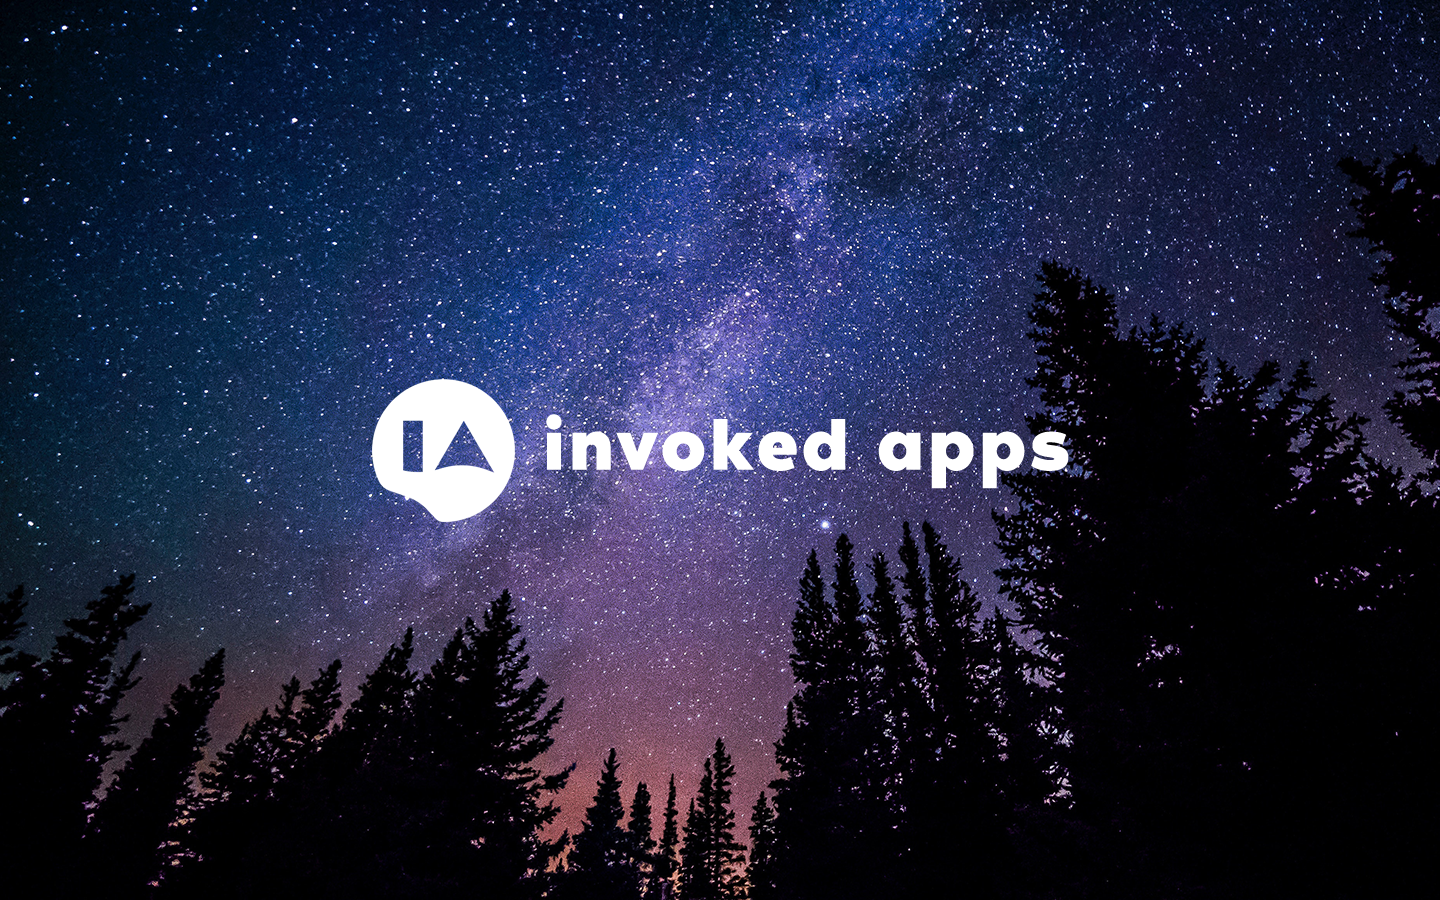 Invoked Apps logo amidst a starry sky.